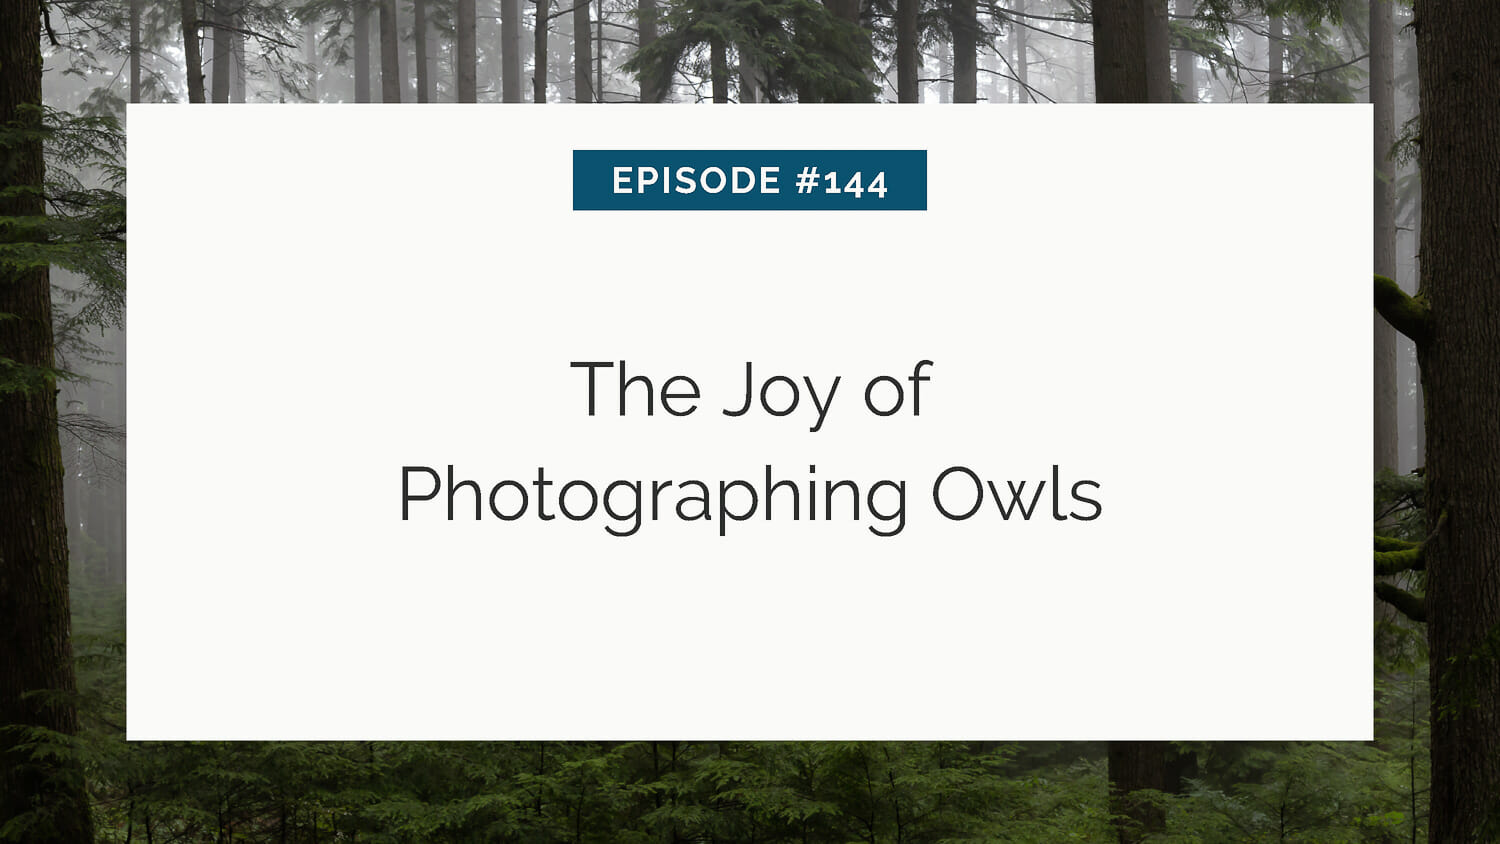 Slide with title "the joy of photographing owls" for episode #144, set against a backdrop of a misty forest.